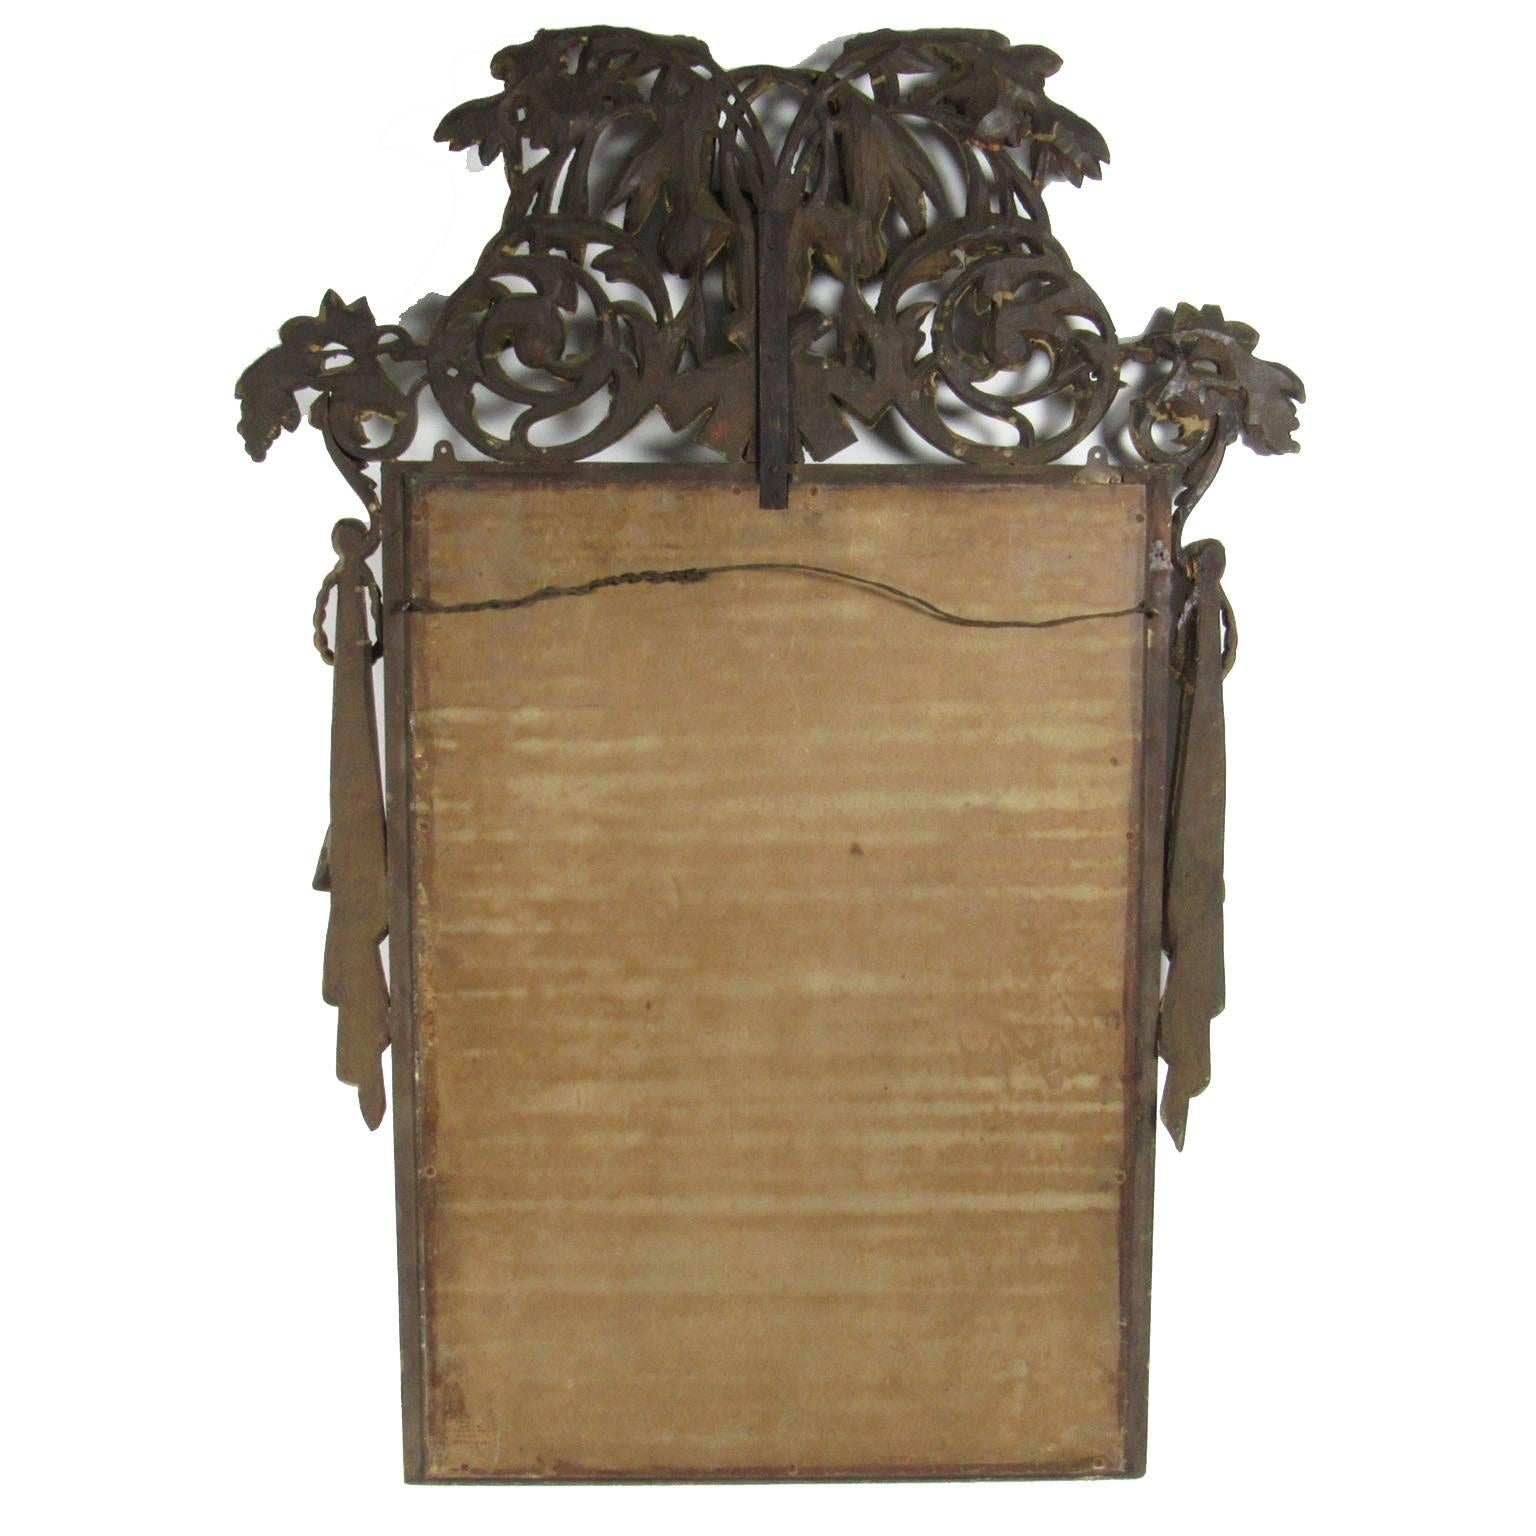 Antique Hand-Carved Decorative Wall Mirror In Fair Condition For Sale In Concord, MA